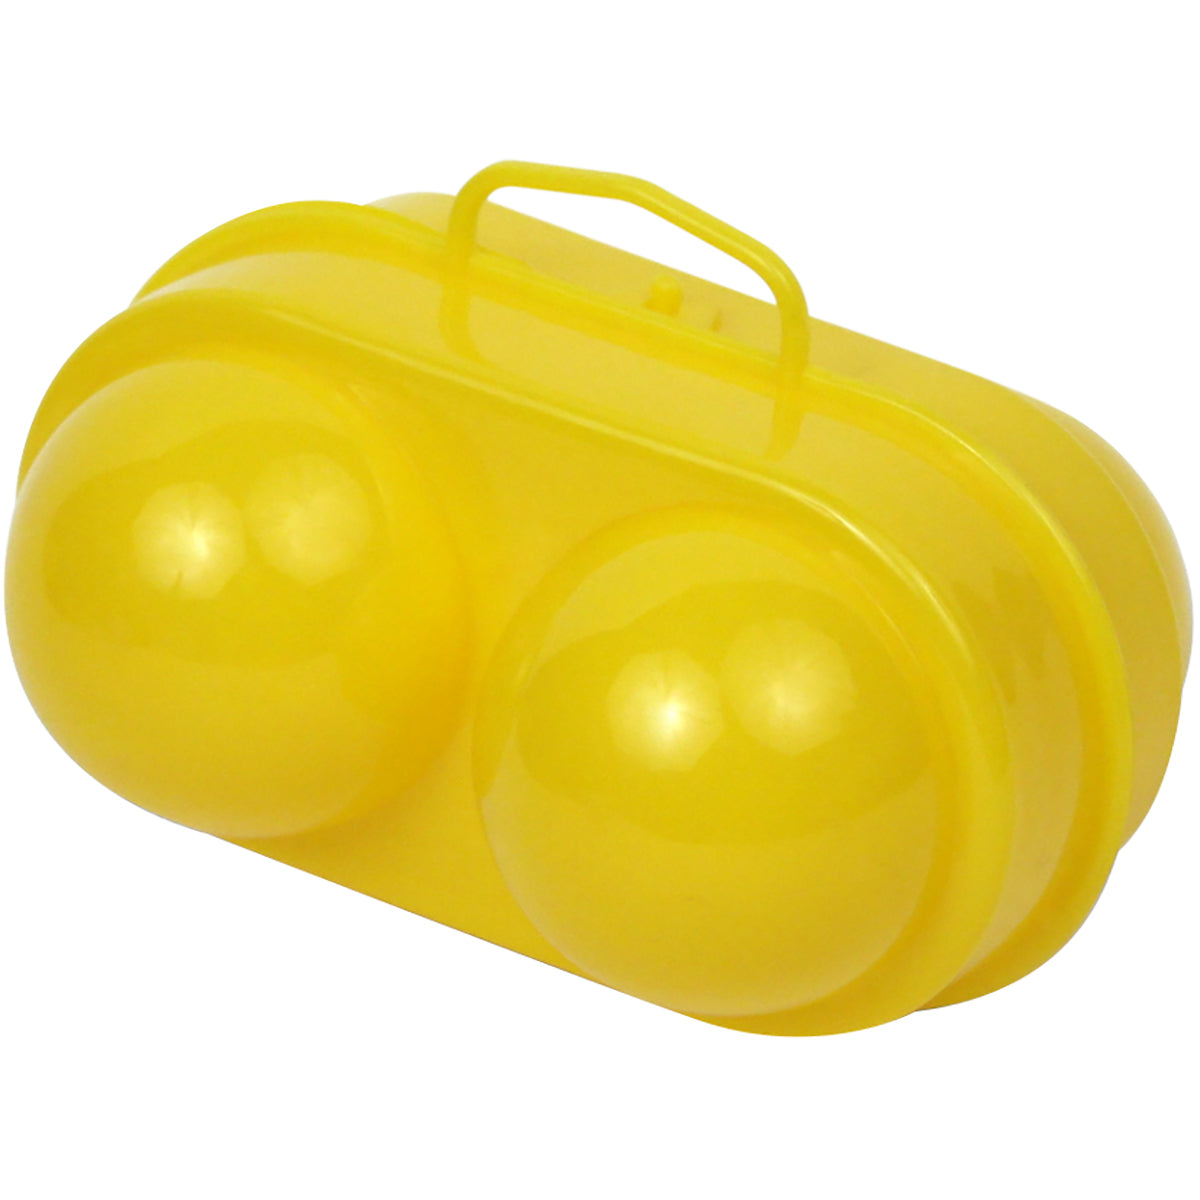 Coghlan's Egg Holder, Compact Carrier Storage Container Travel Case Coghlan's